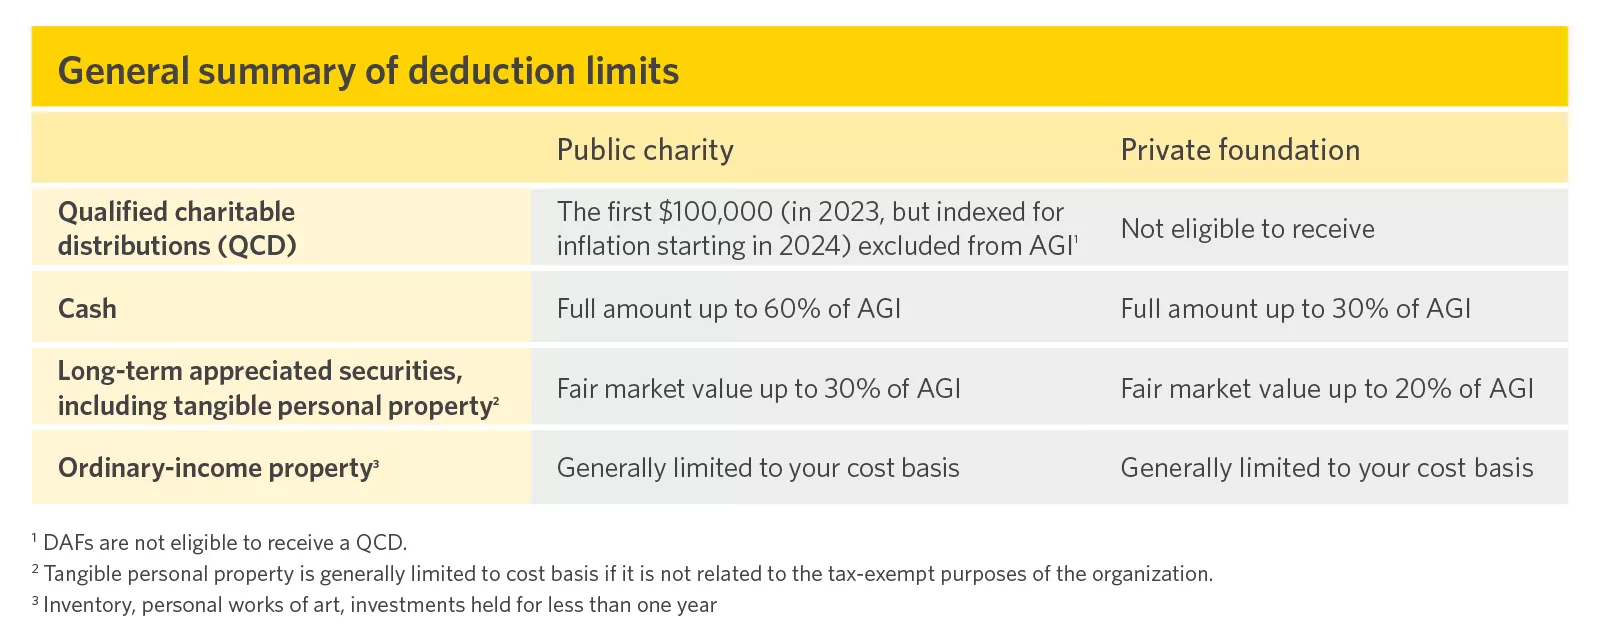  chart showing general summary of deduction limits
